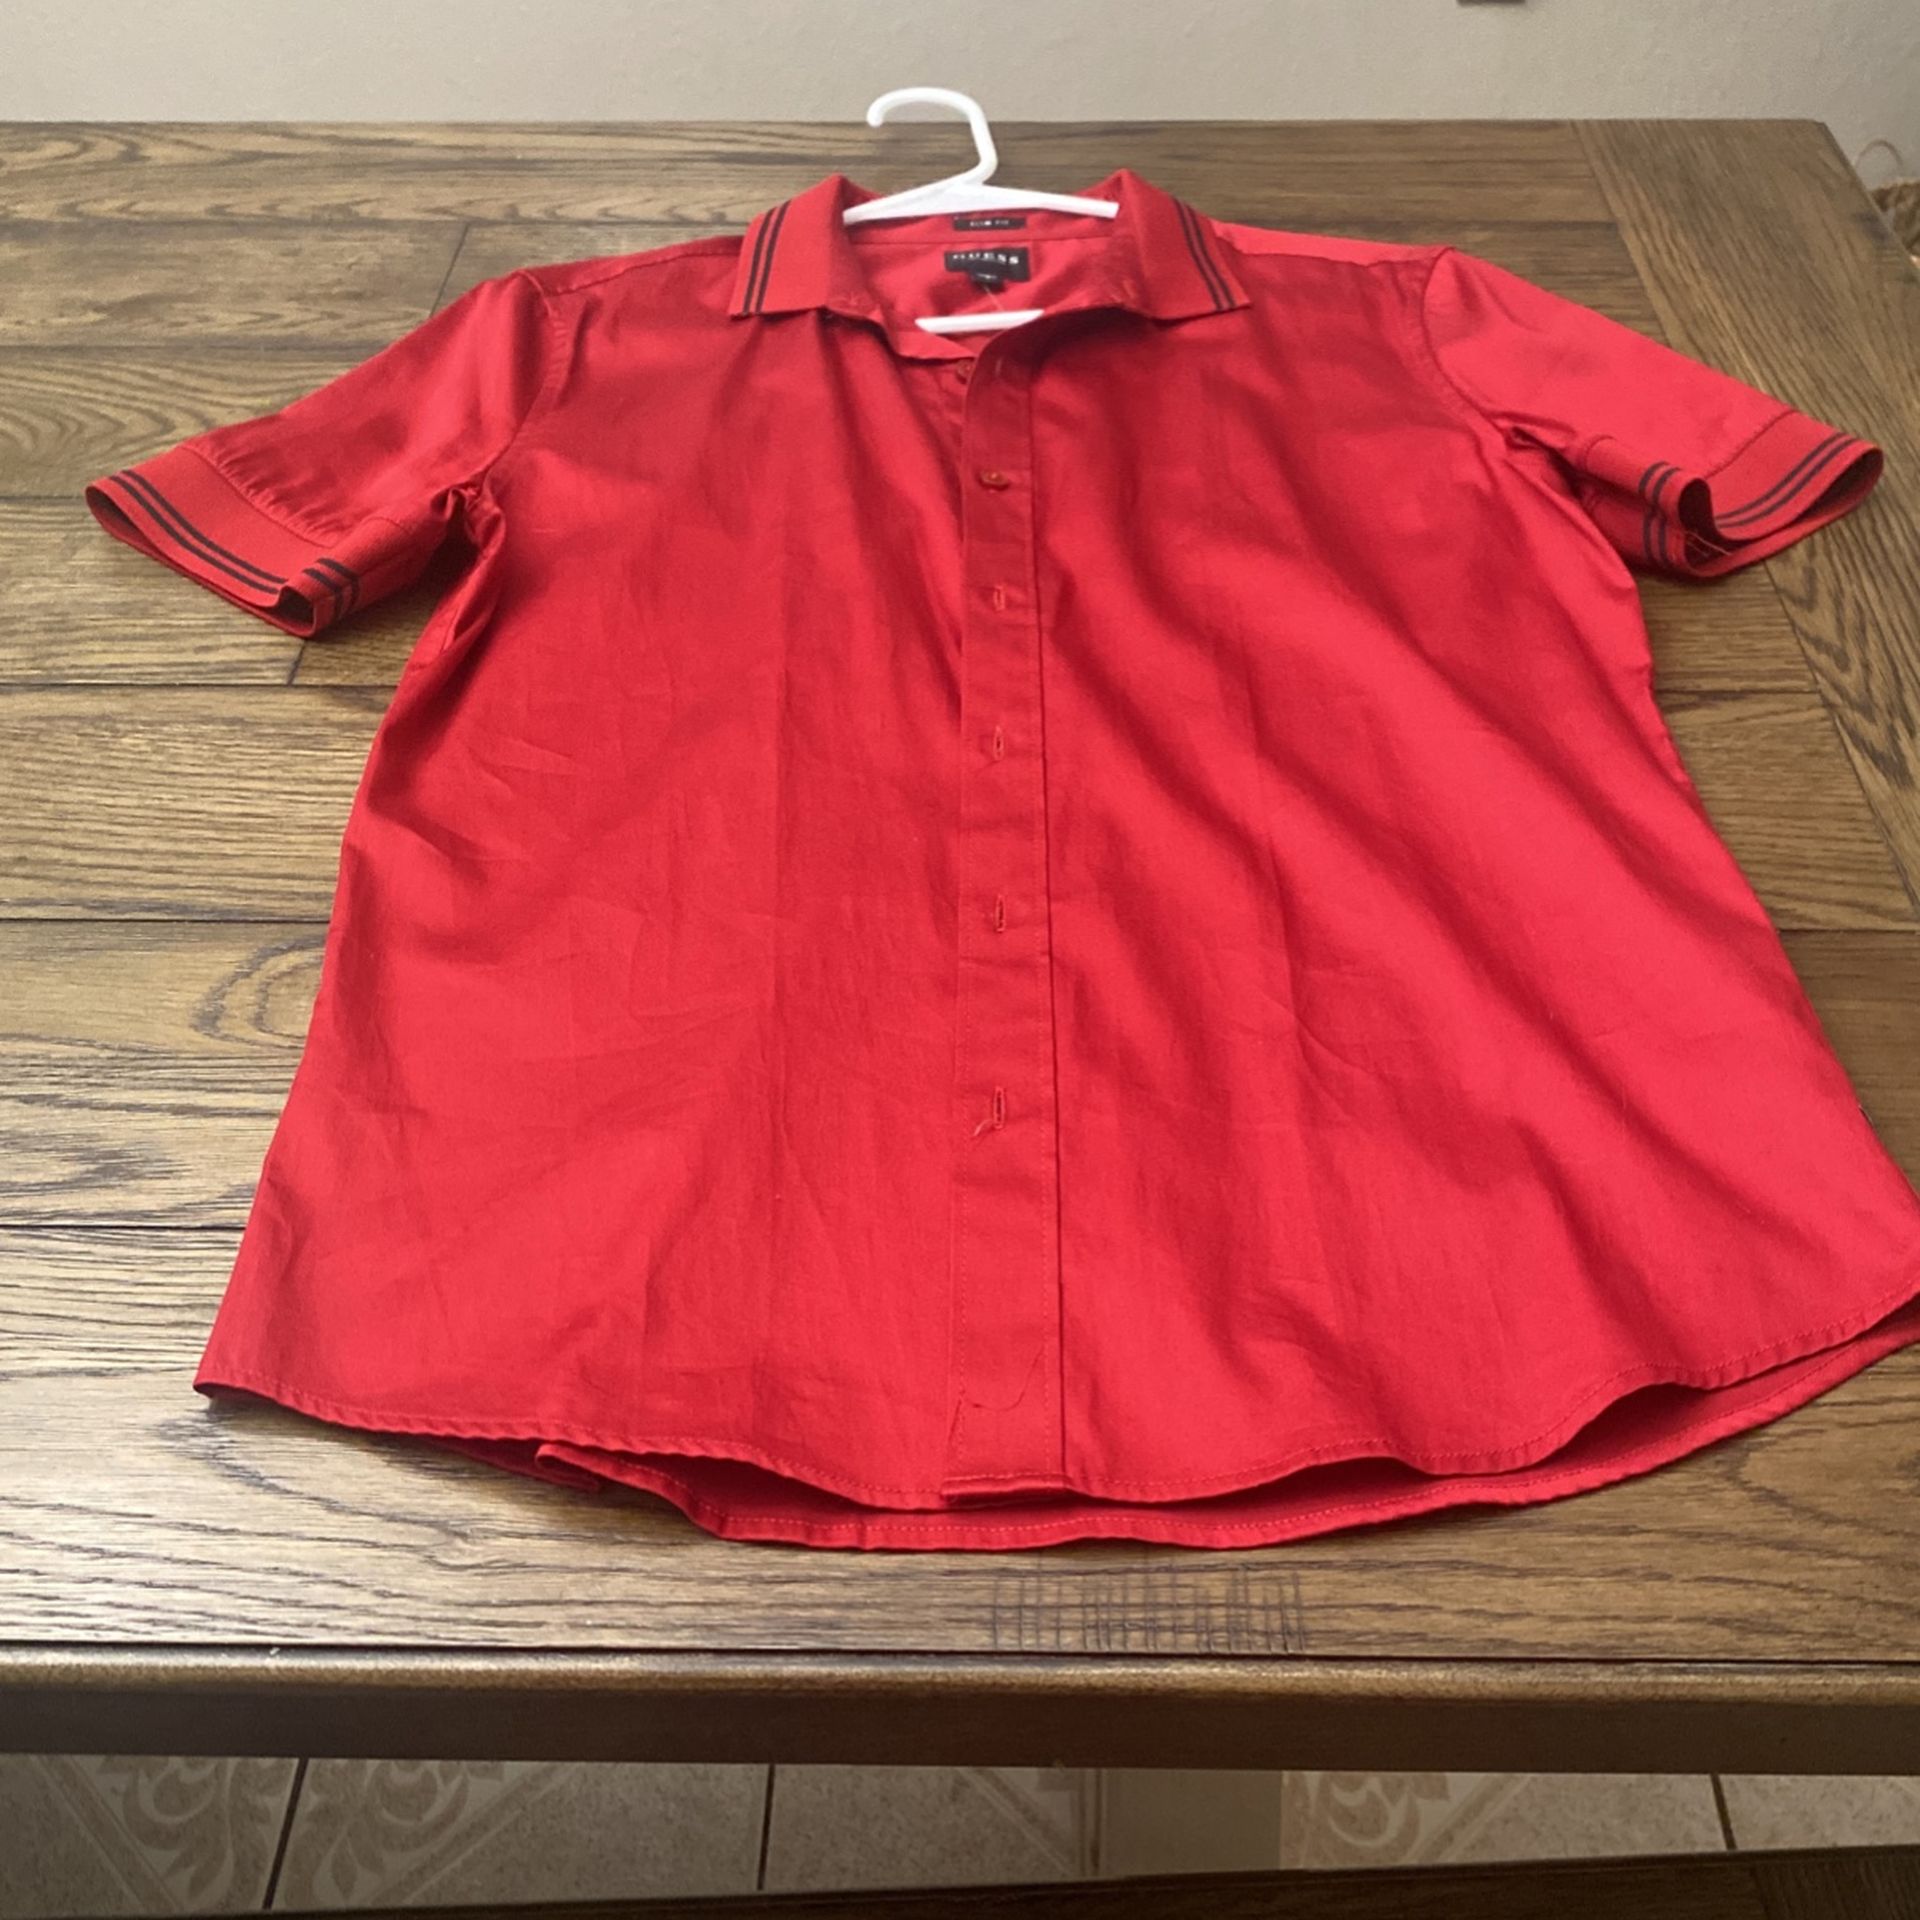 Guess Men’s Slim Fit Shirt Size Small